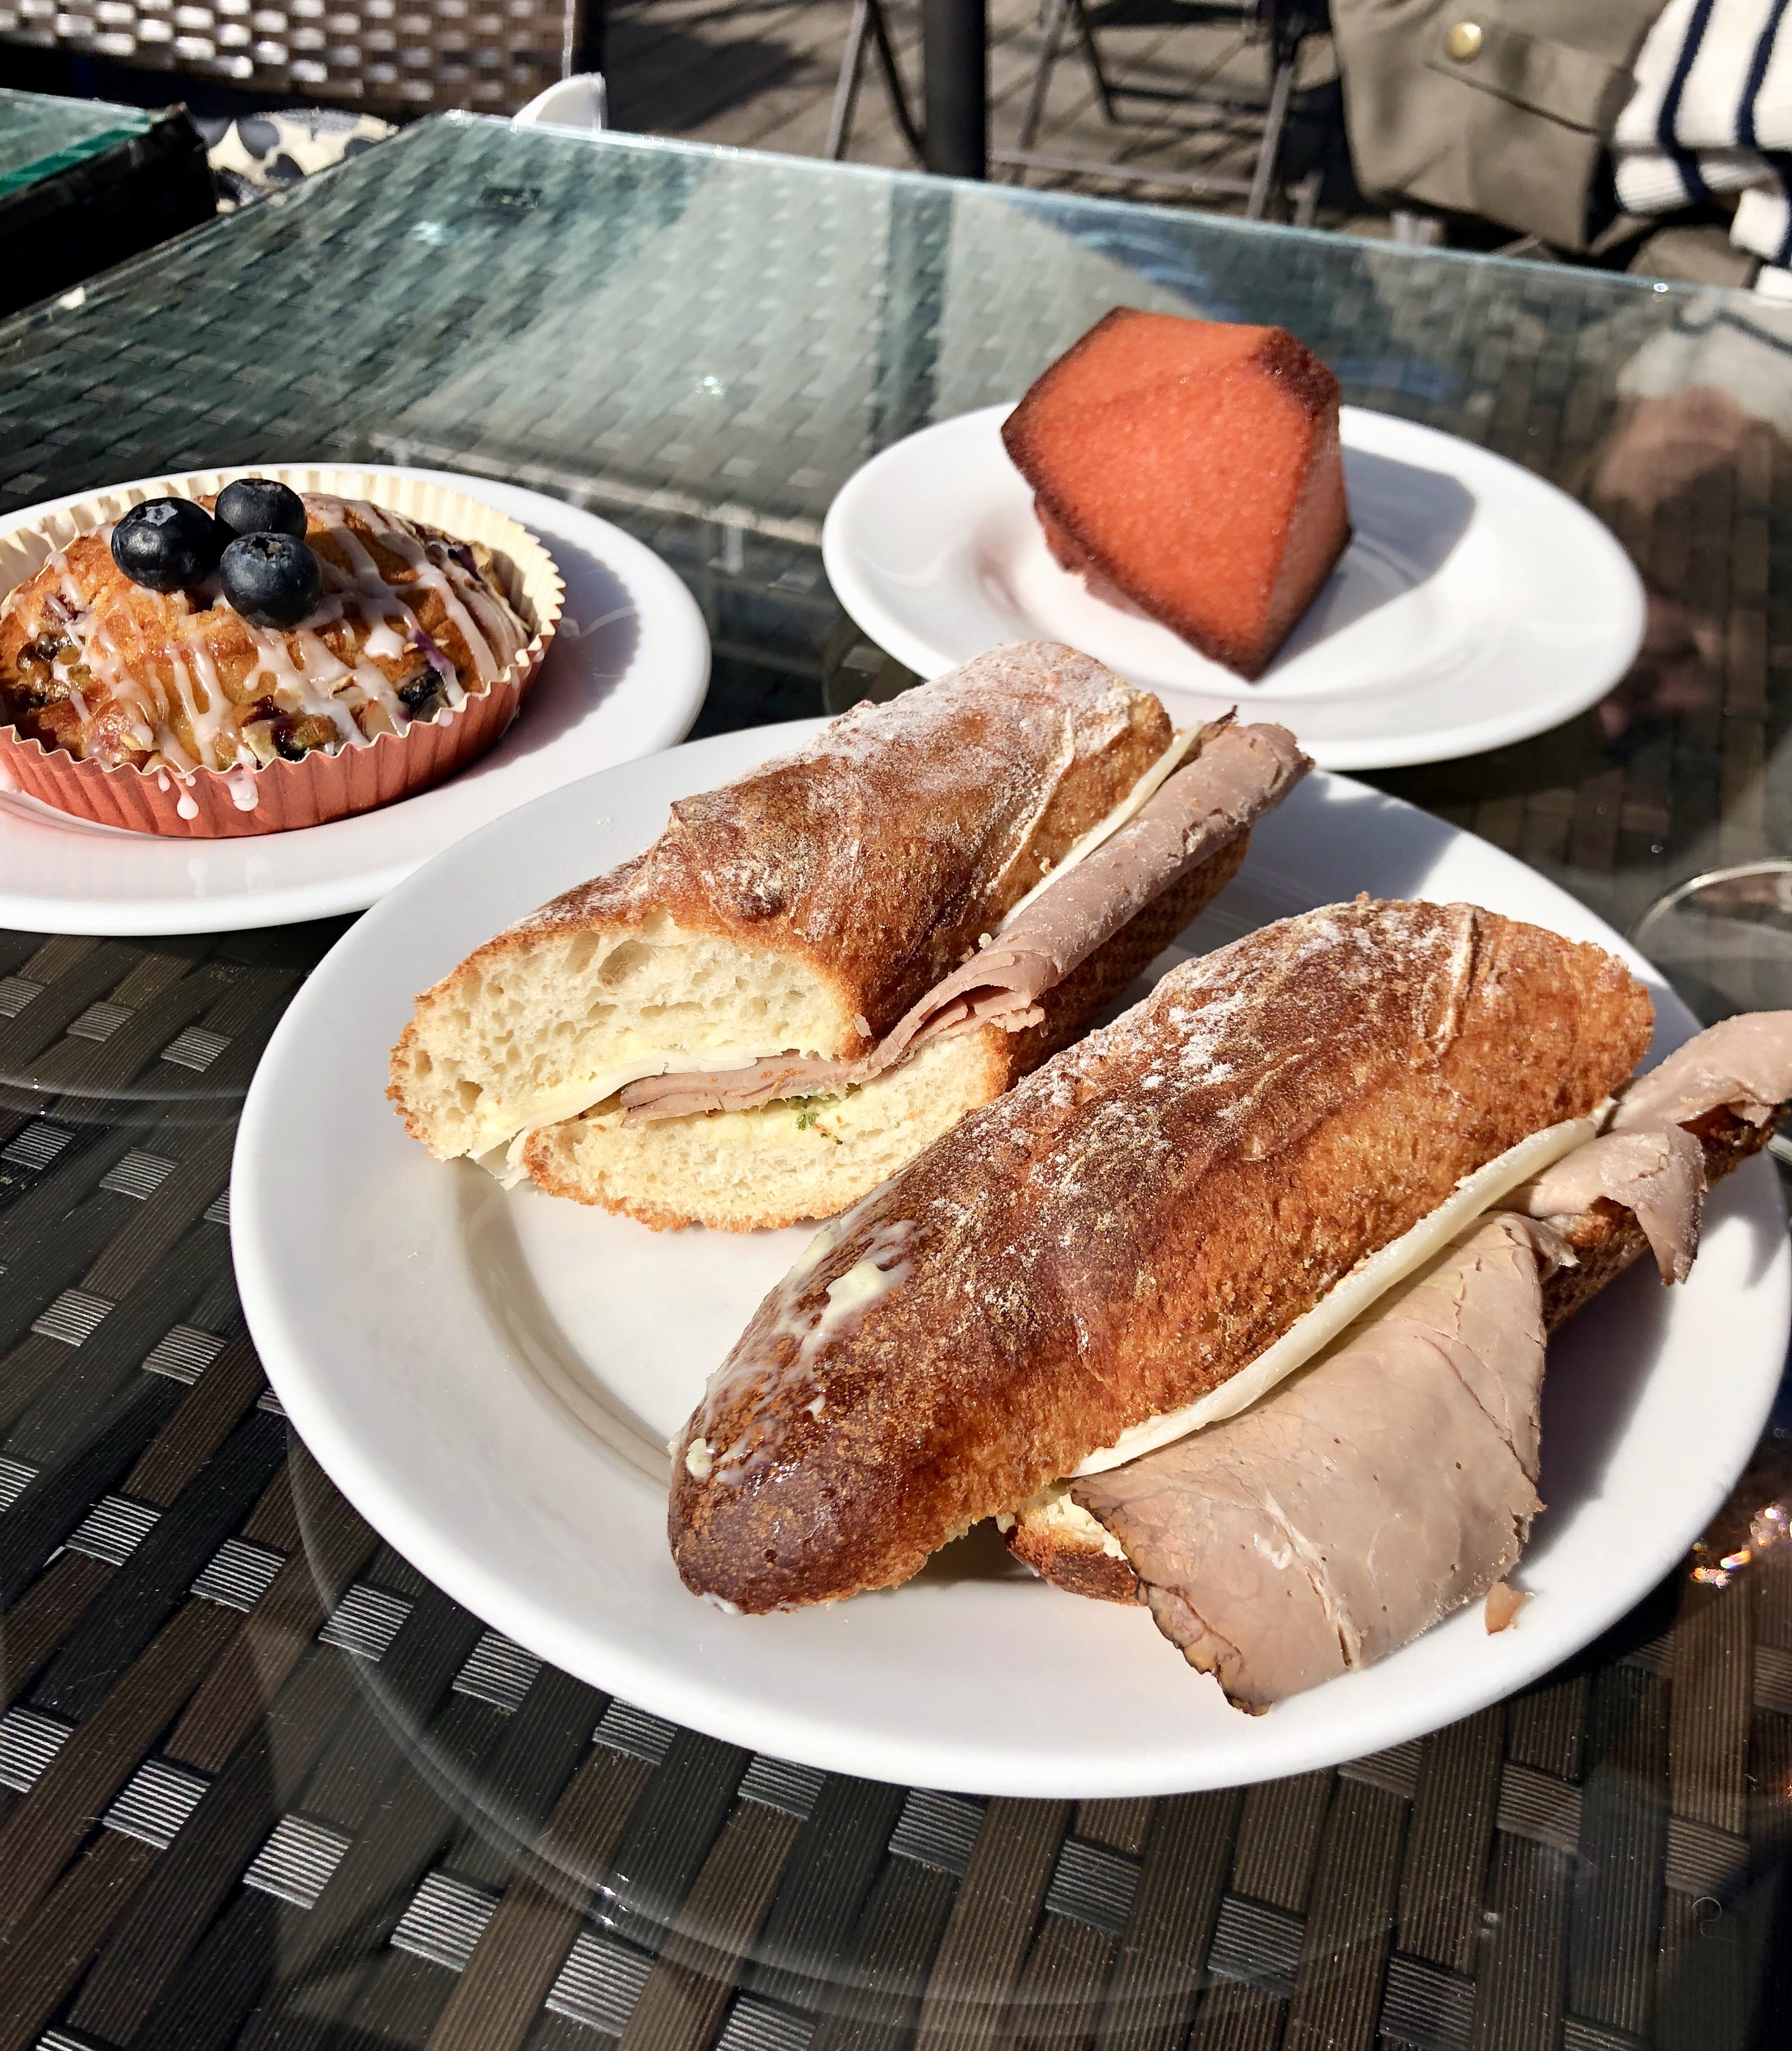 Roast Beef and Cheese Baguette, Financier and Coffee Cake